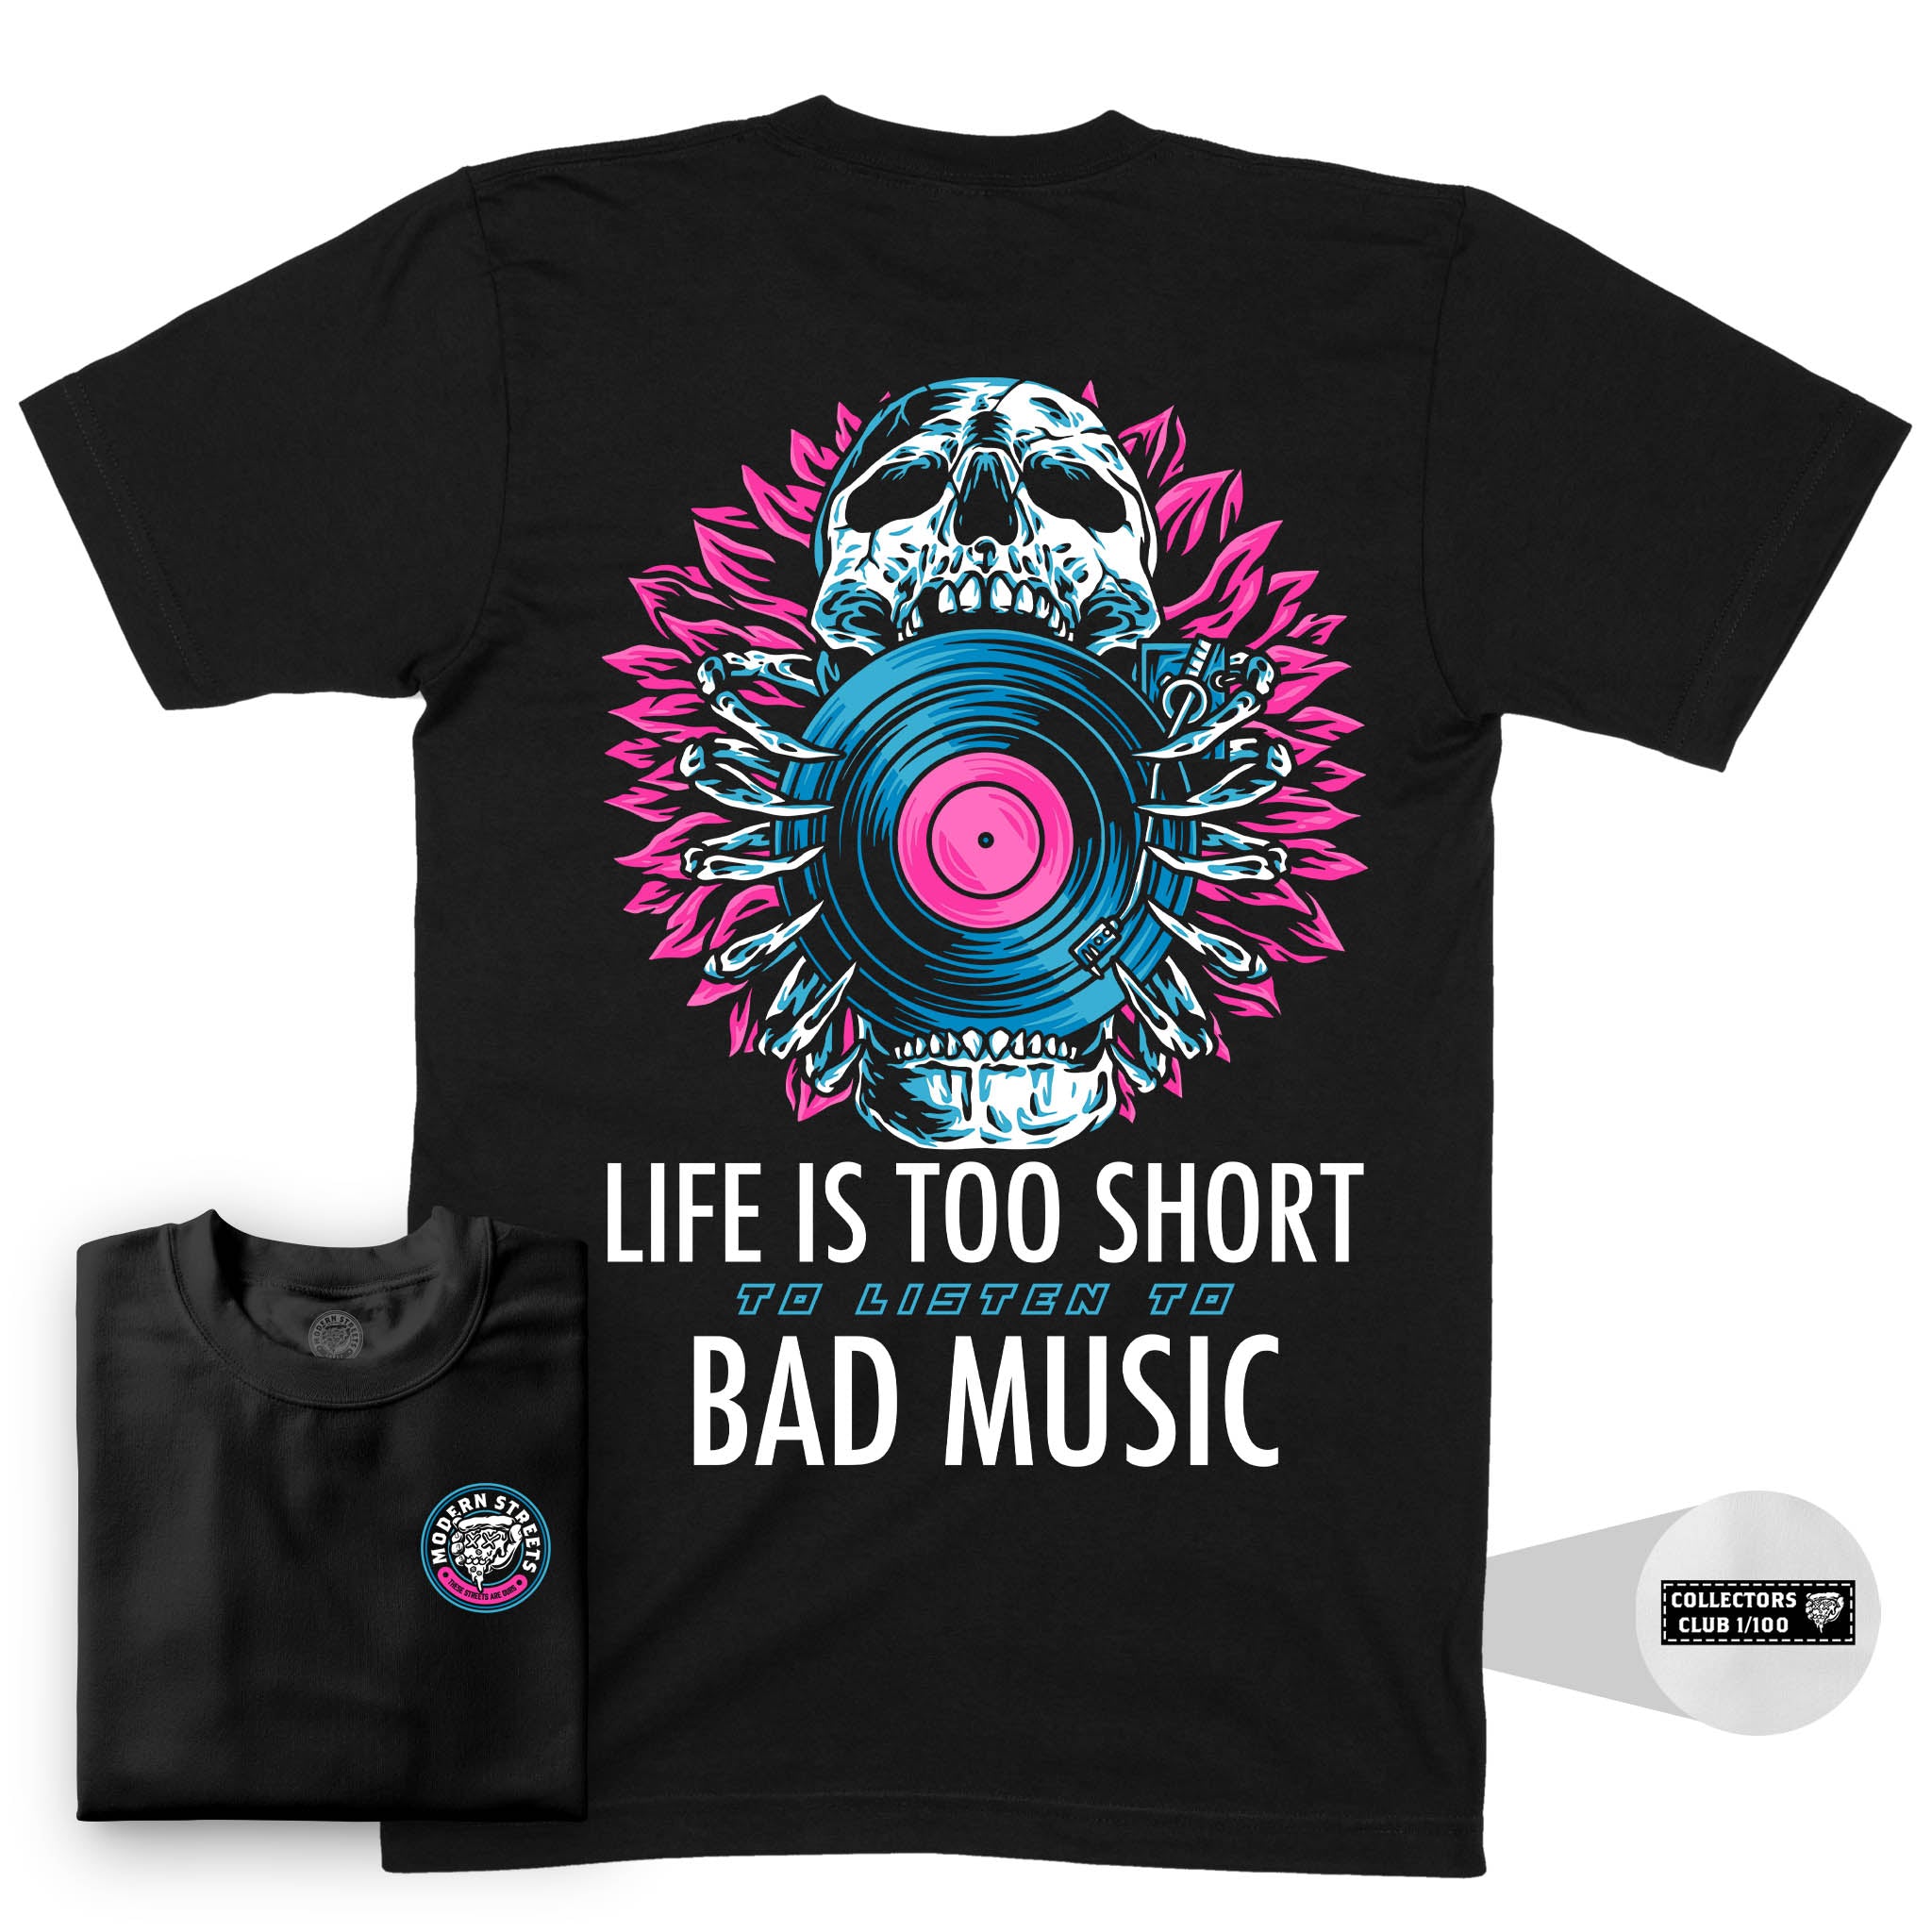 Life Is Too Short To Listen To Bad Music T-Shirt